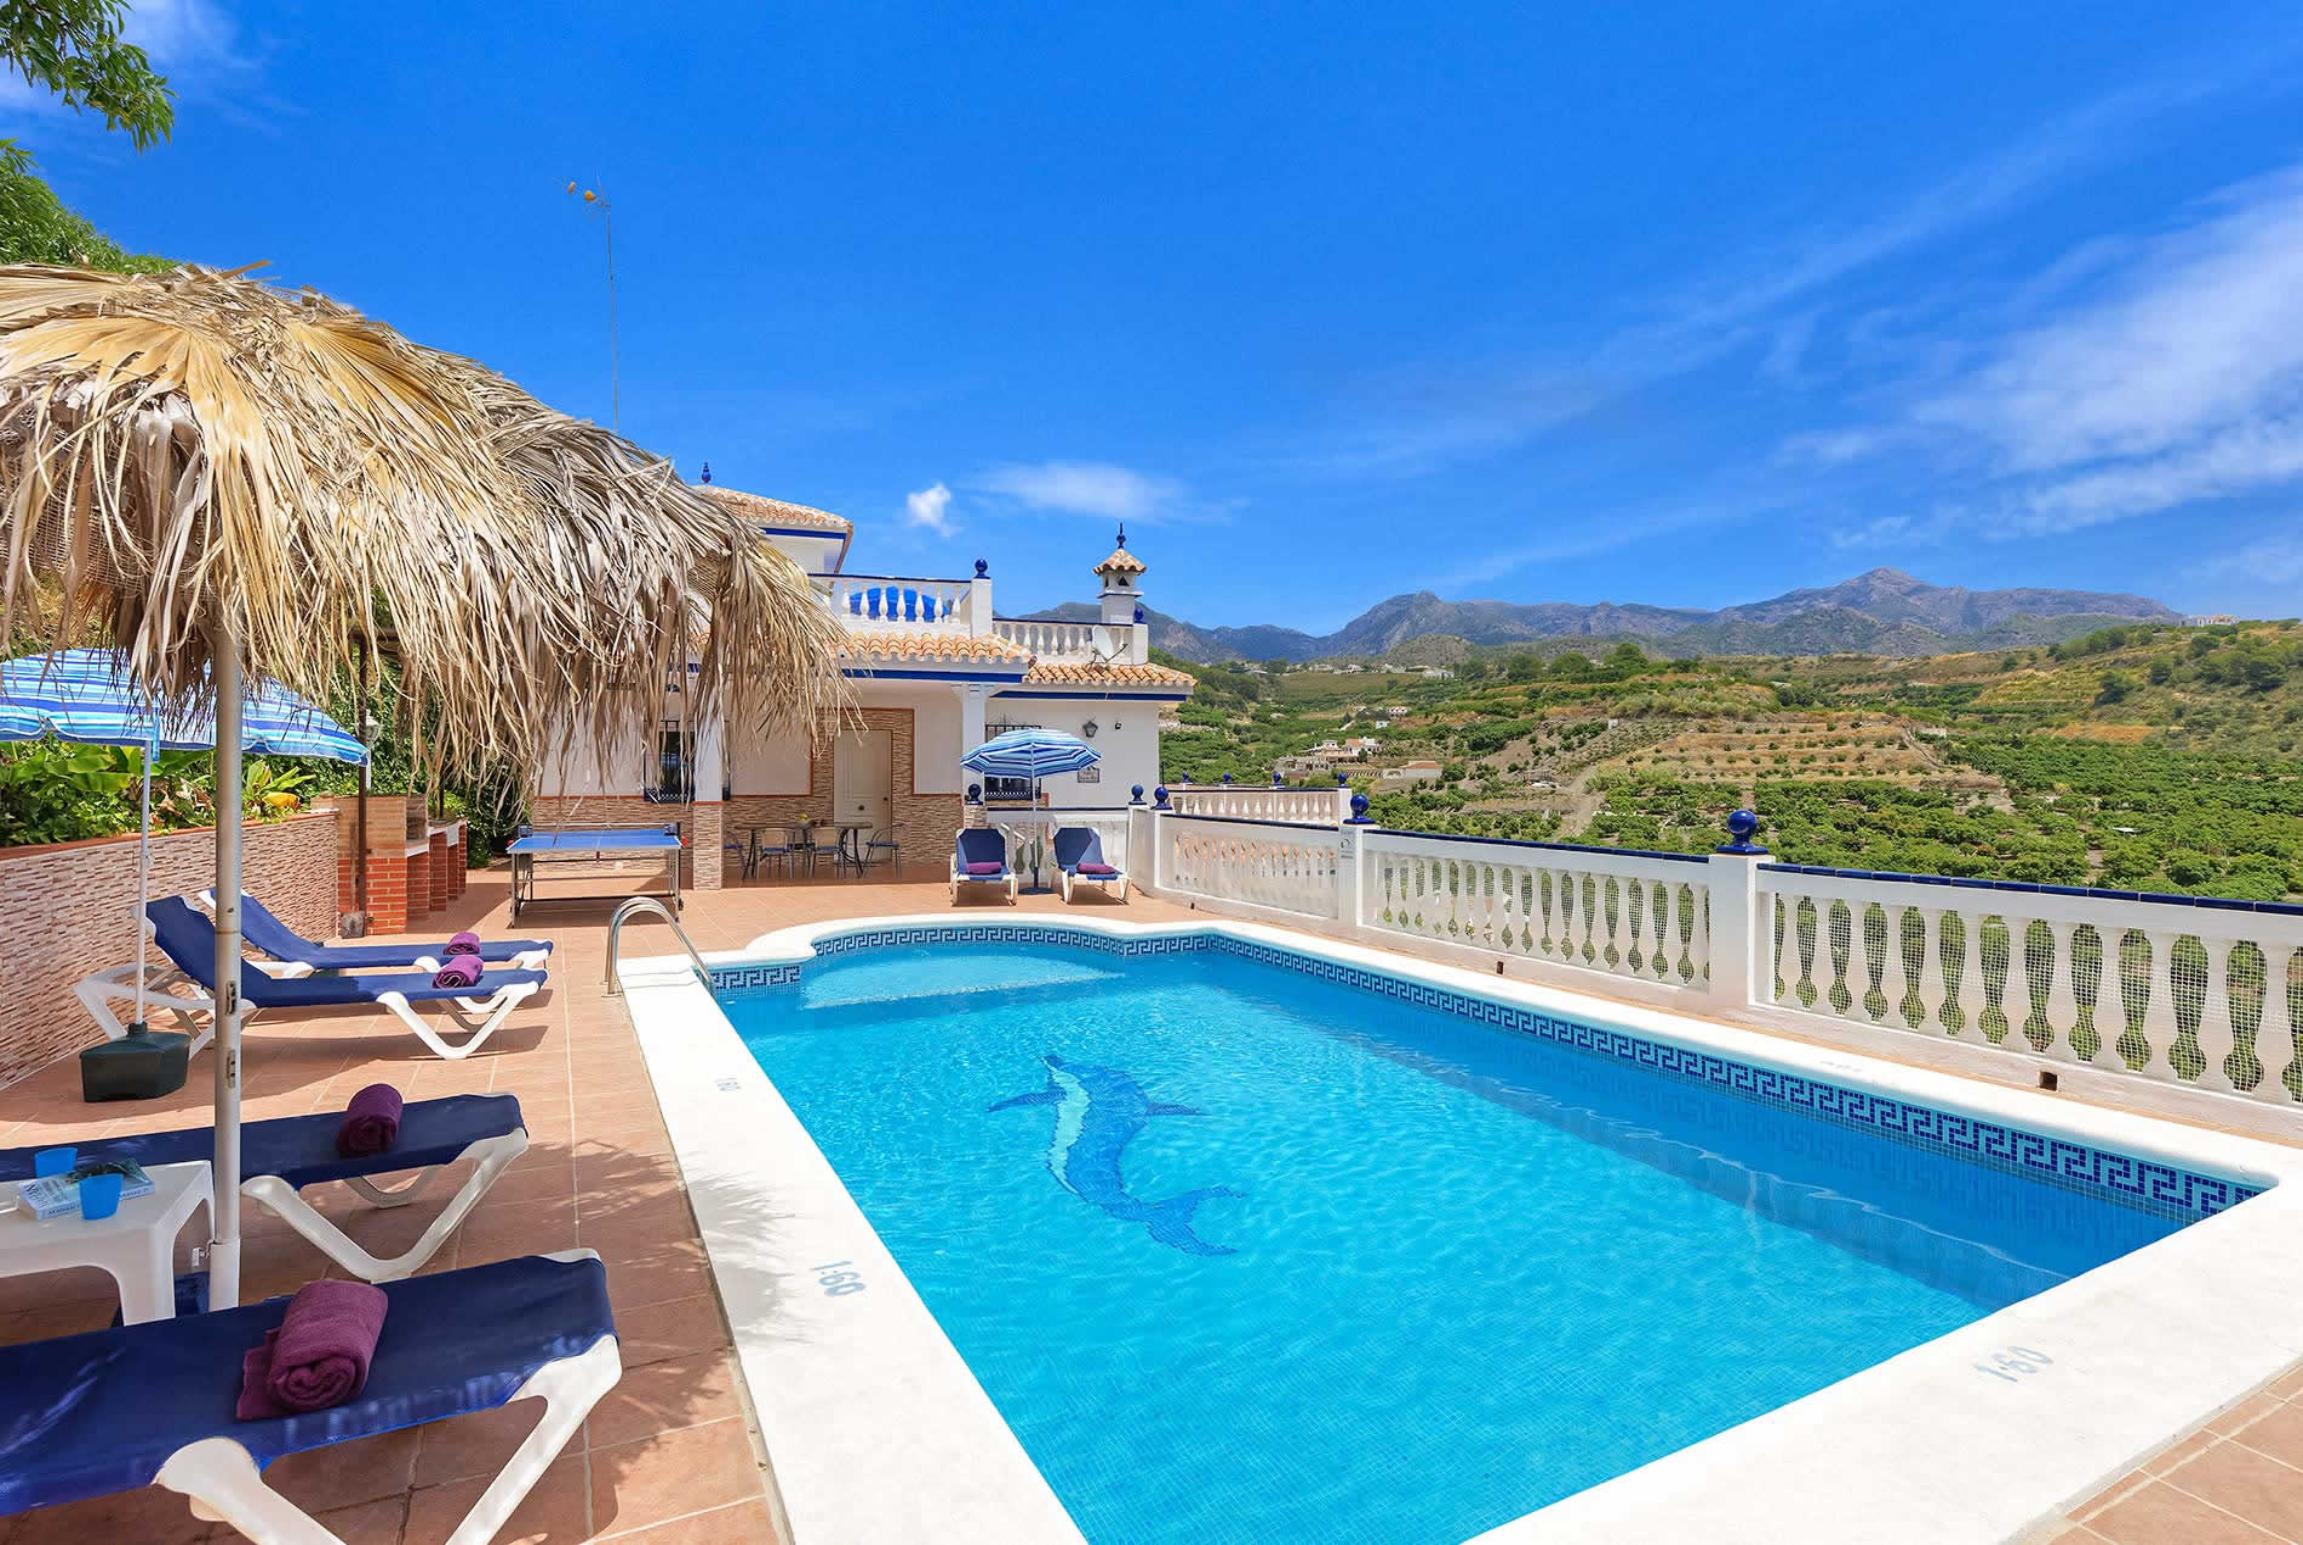 Property Image 1 - Popular villa with great views close to the sea